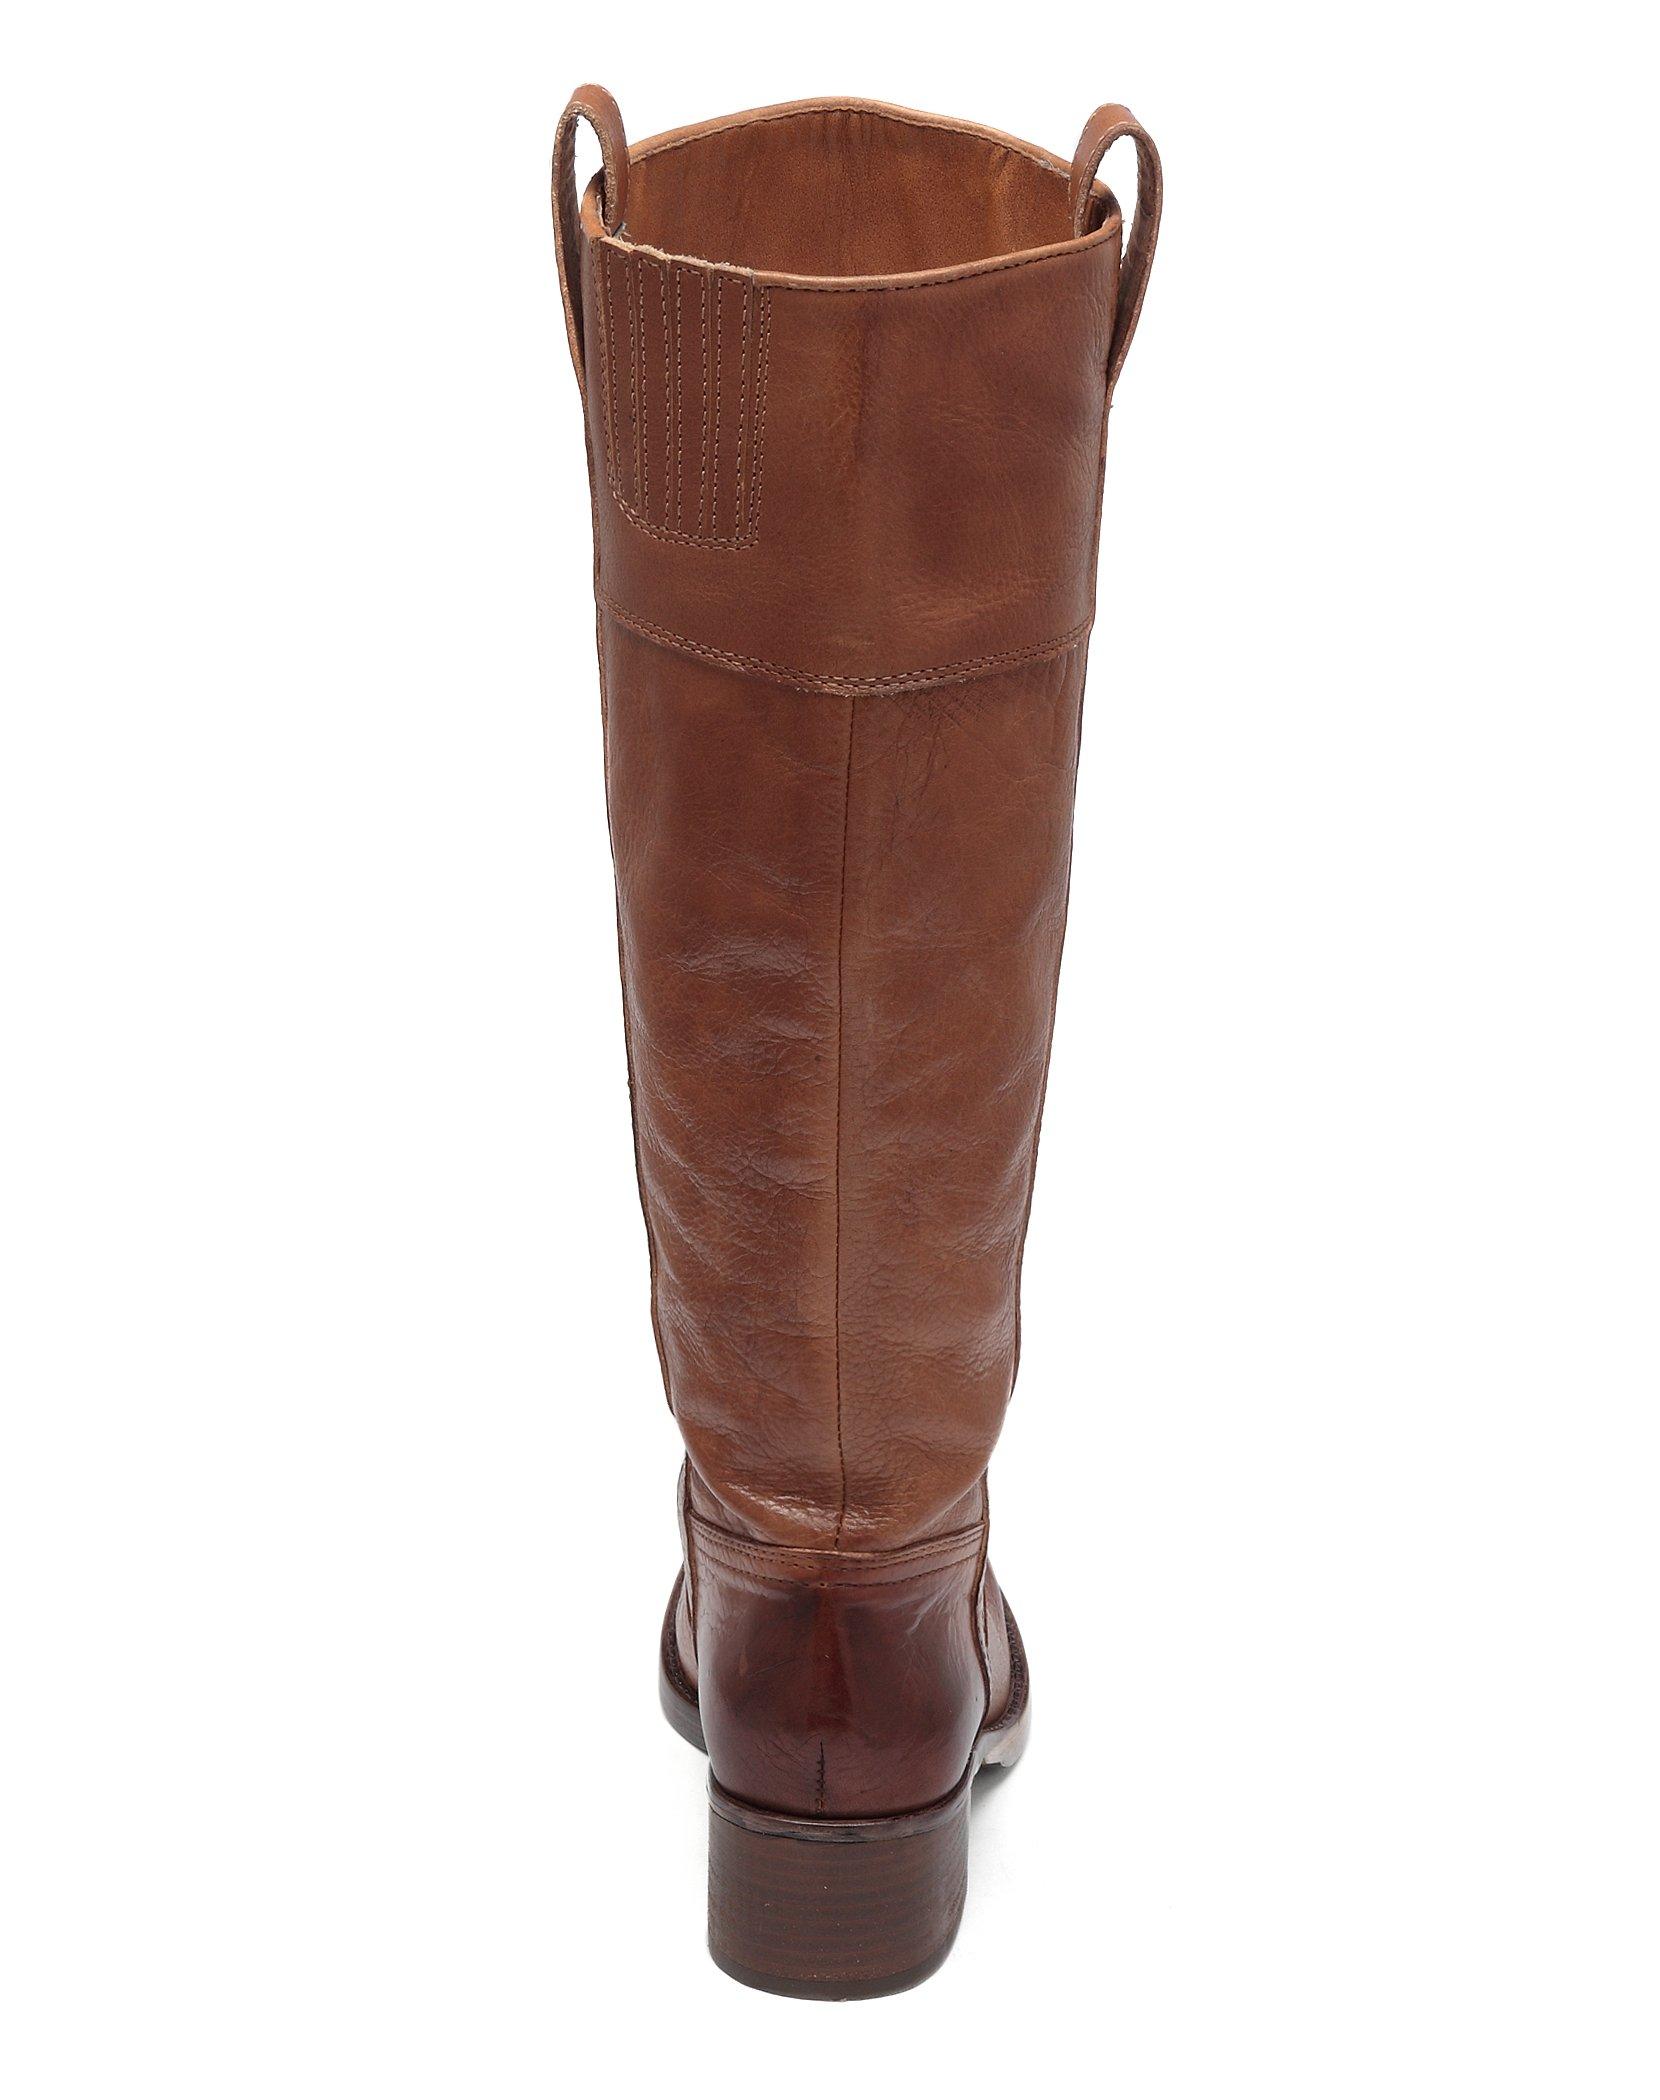 HIBISCUS RIDING BOOT | Lucky Brand